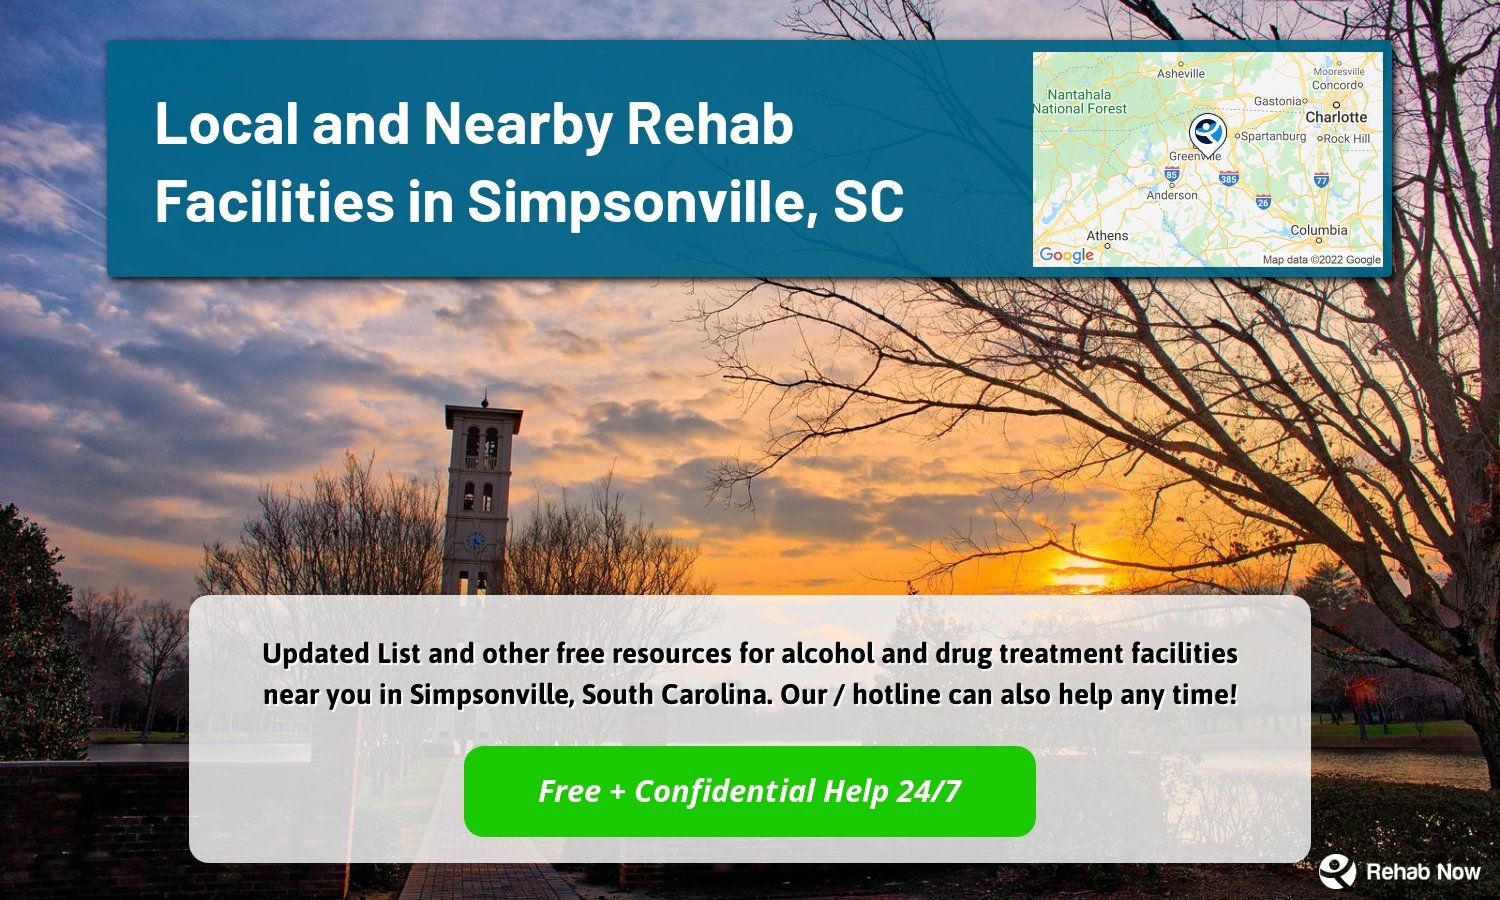  Updated List and other free resources for alcohol and drug treatment facilities near you in Simpsonville, South Carolina. Our / hotline can also help any time!